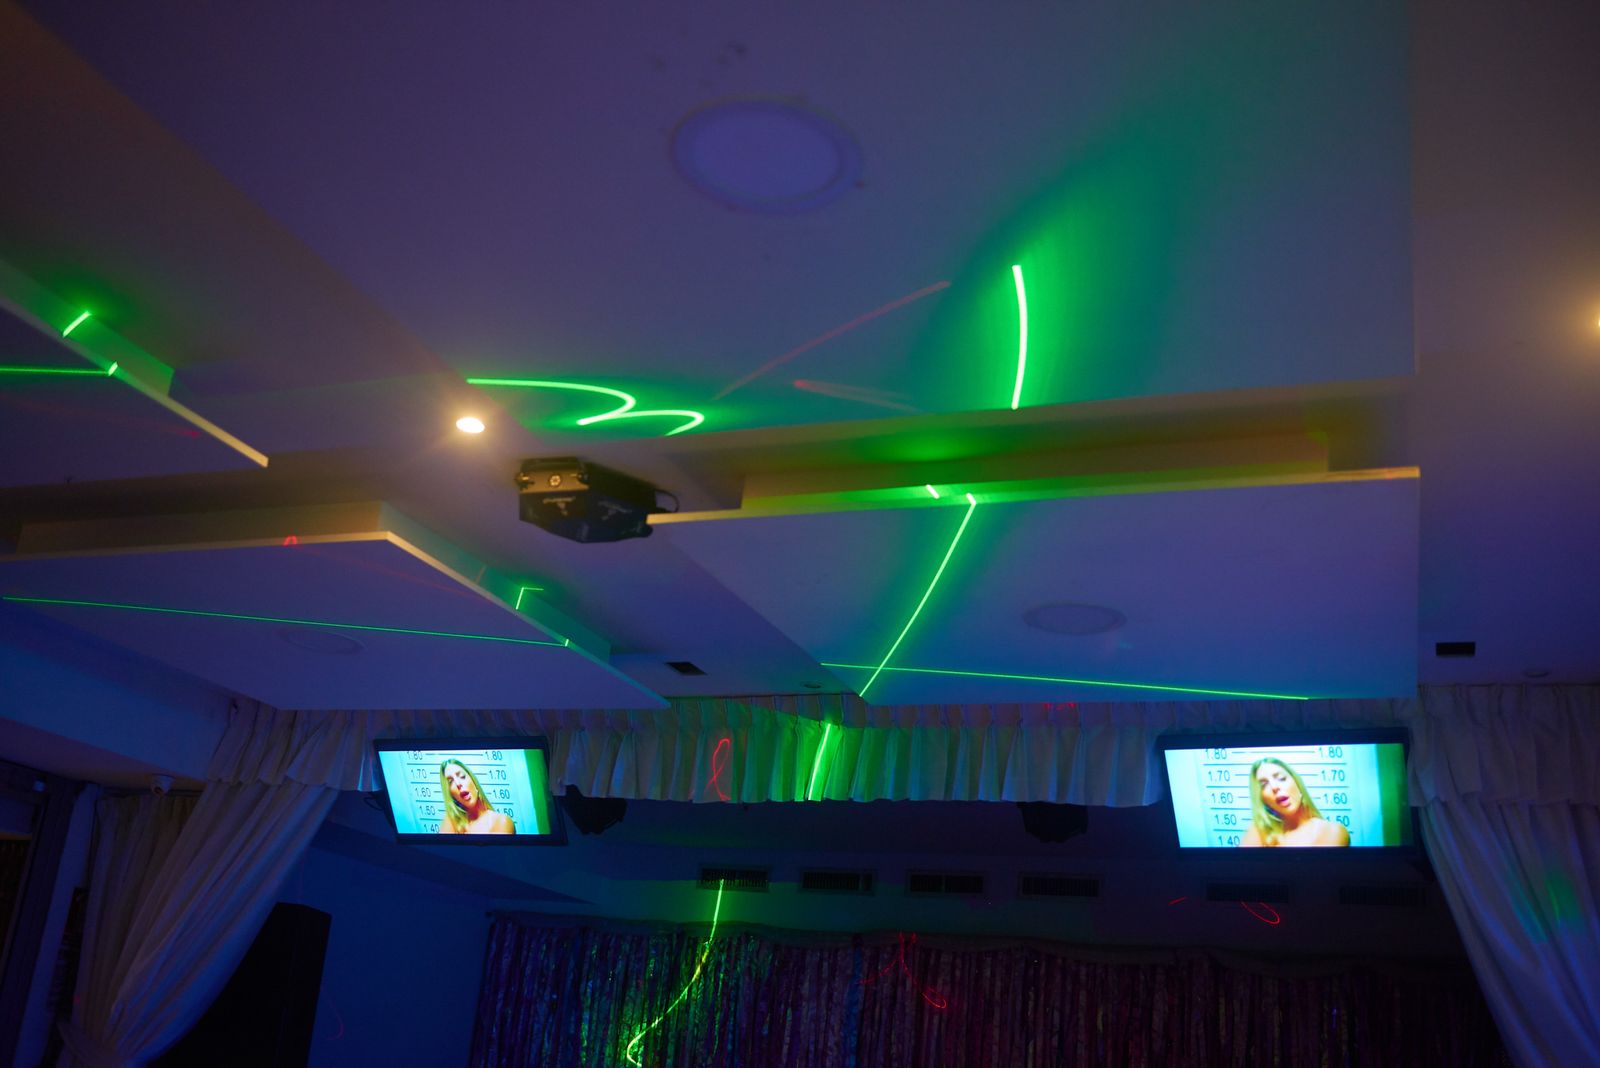 © Lexi Parra - Neon colors and TVs illuminate the otherwise dark, small club.